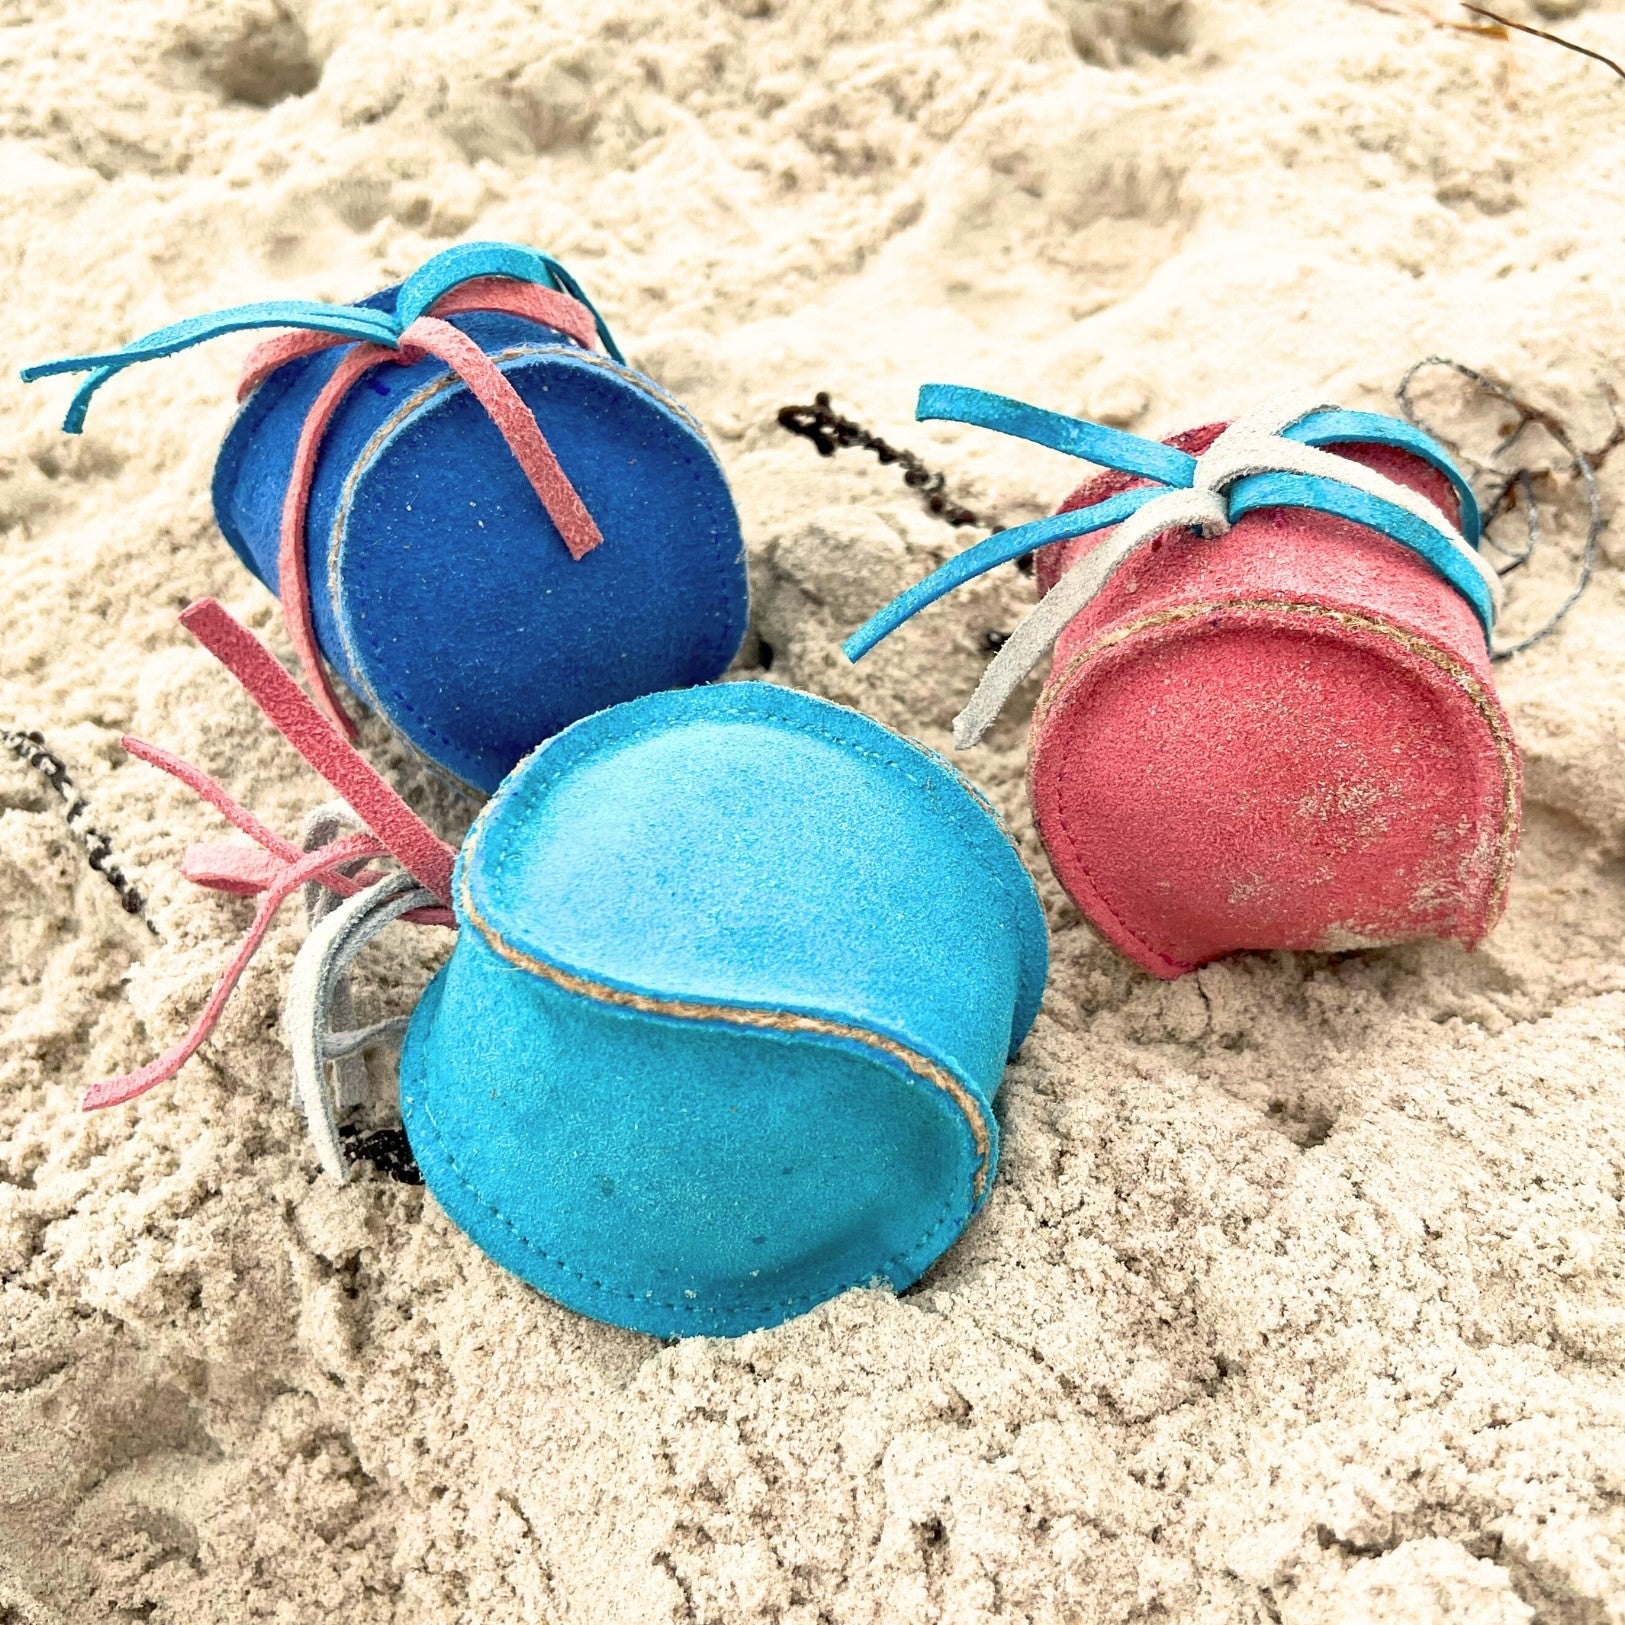 Four colorful, worn-out Bobble Sea Urchin - blue juggling balls, made from buffalo suede and with shades of blue, pink, and red, rest on sandy ground, their laces partly buried, showing signs of frequent use.